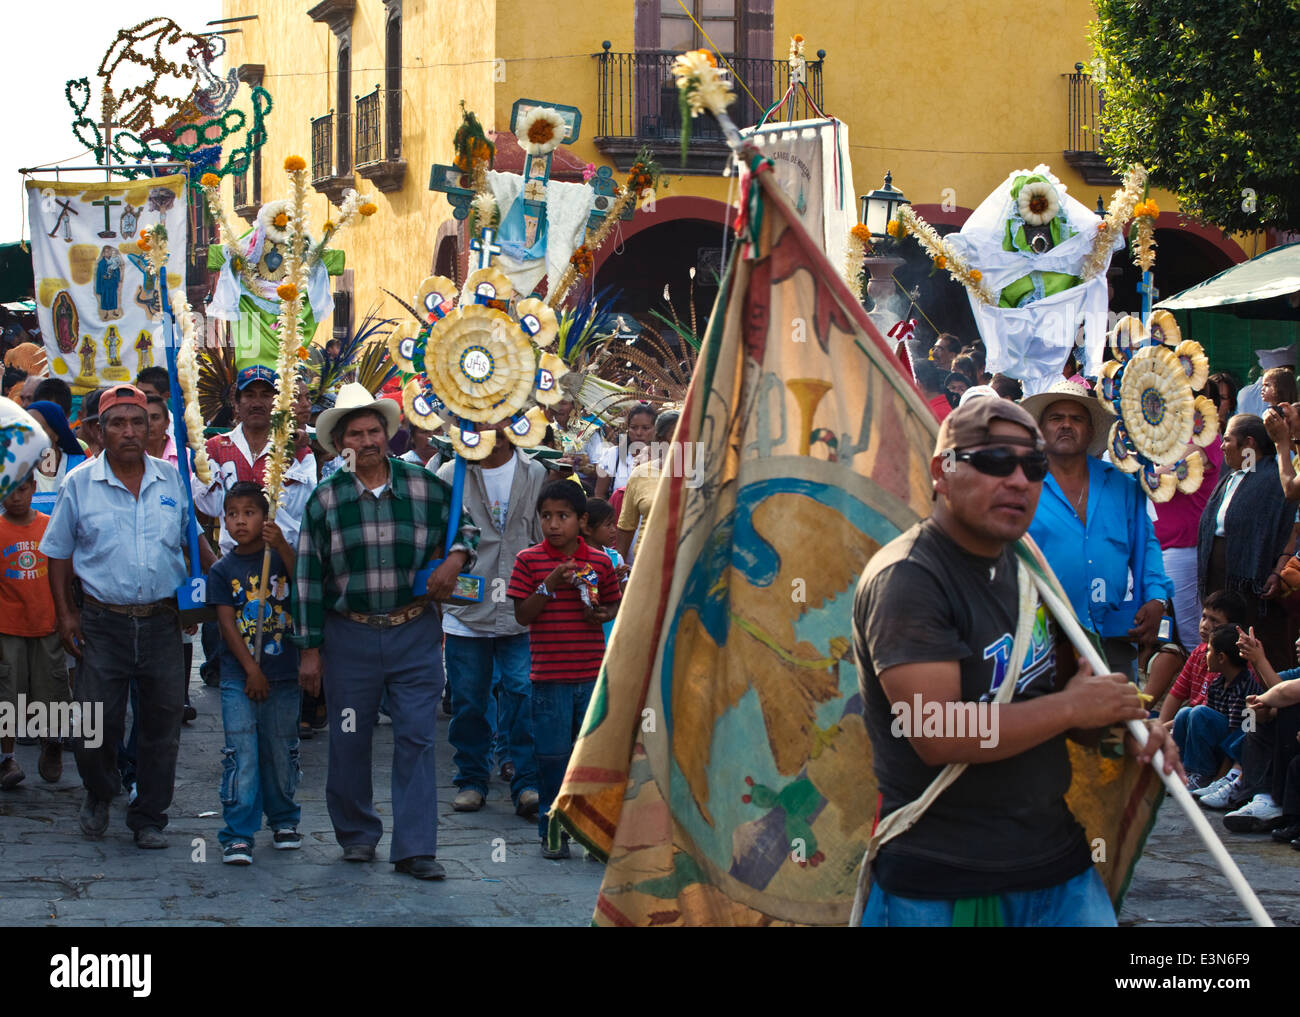 Mexicans participate in the annual INDEPENDENCE DAY PARADE in September - SAN MIGUEL DE ALLENDE, MEXICO Stock Photo